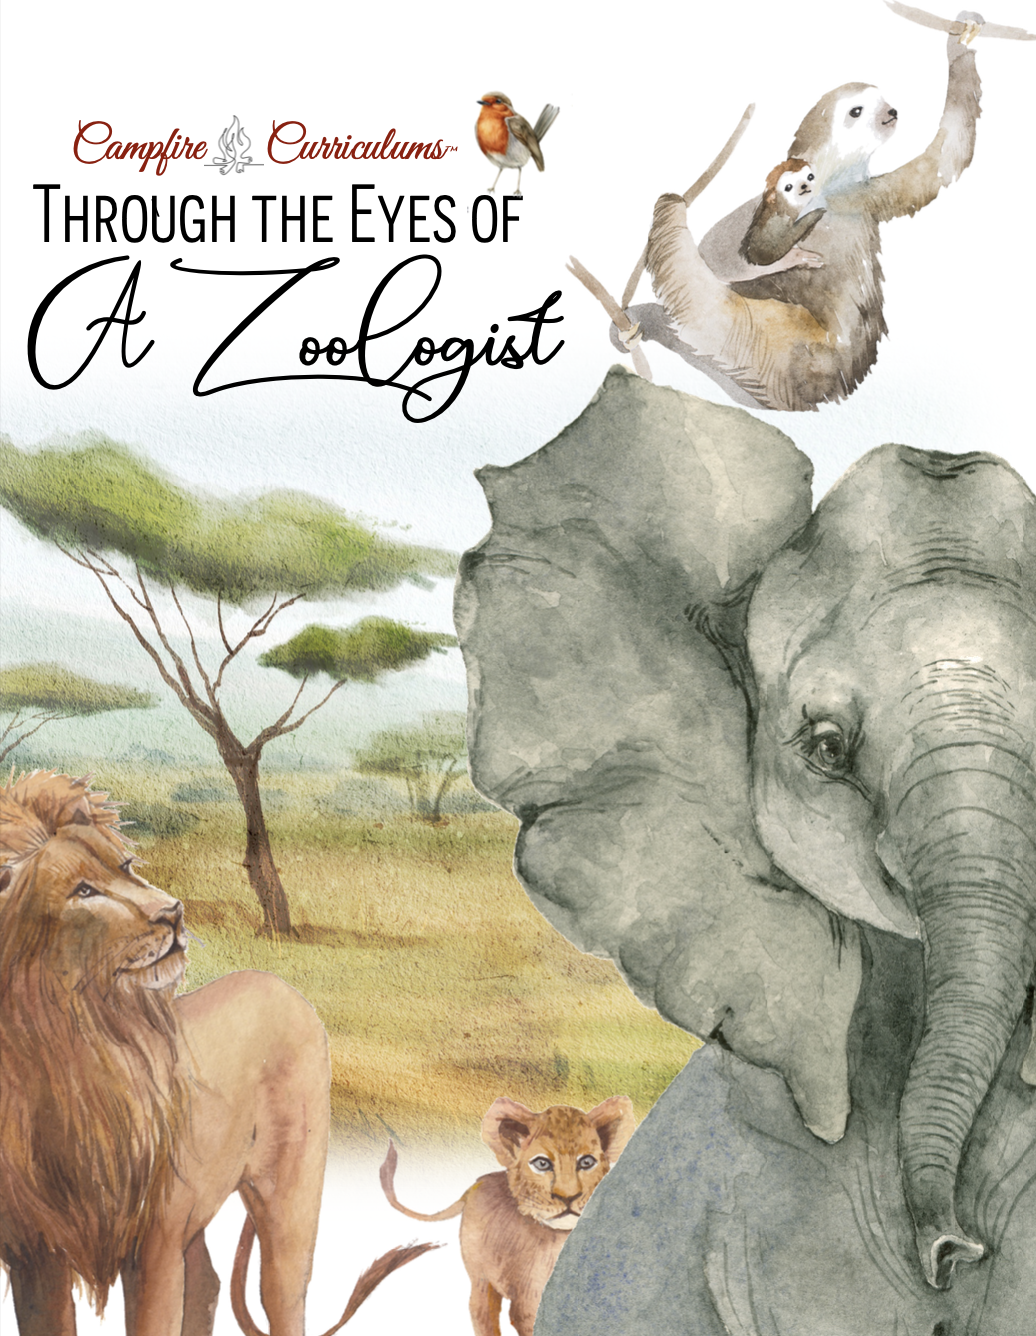 Through the Eyes of | A Zoologist (Full Digital Unit)